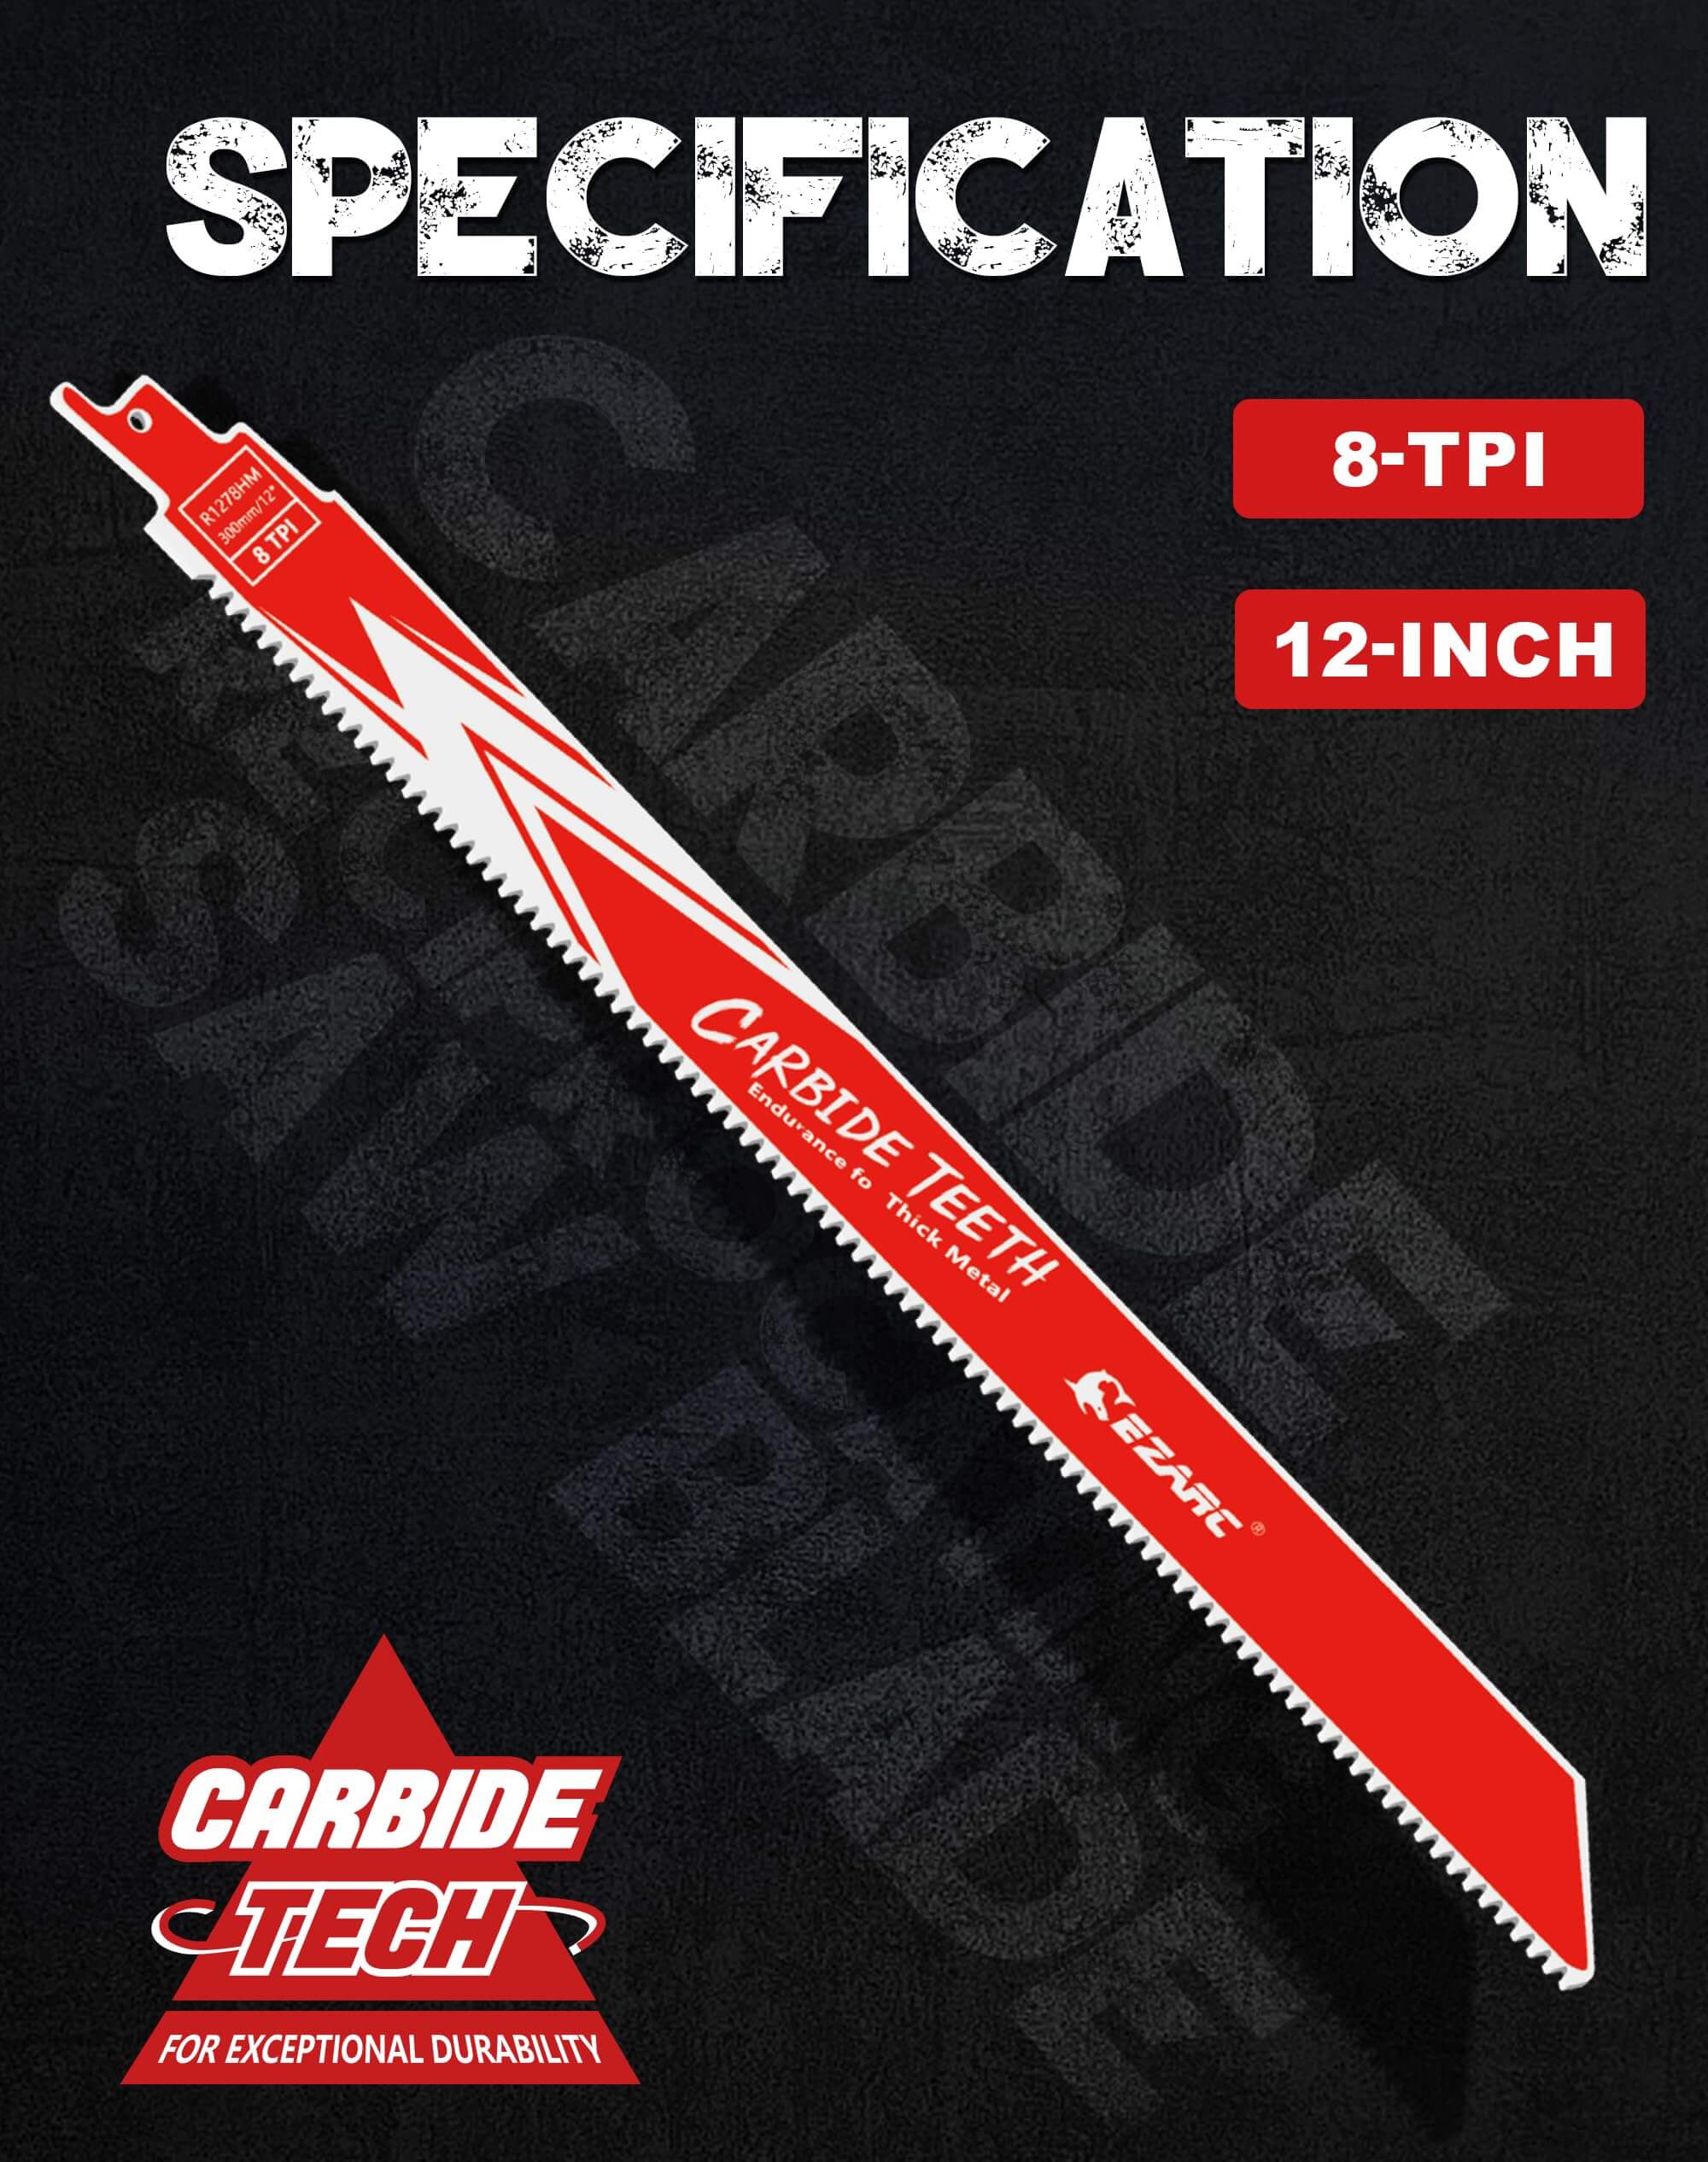 8TPI, 12 in. Carbide Reciprocating Saw Blade for Thick Metal, Cast Iron, Alloy Steel